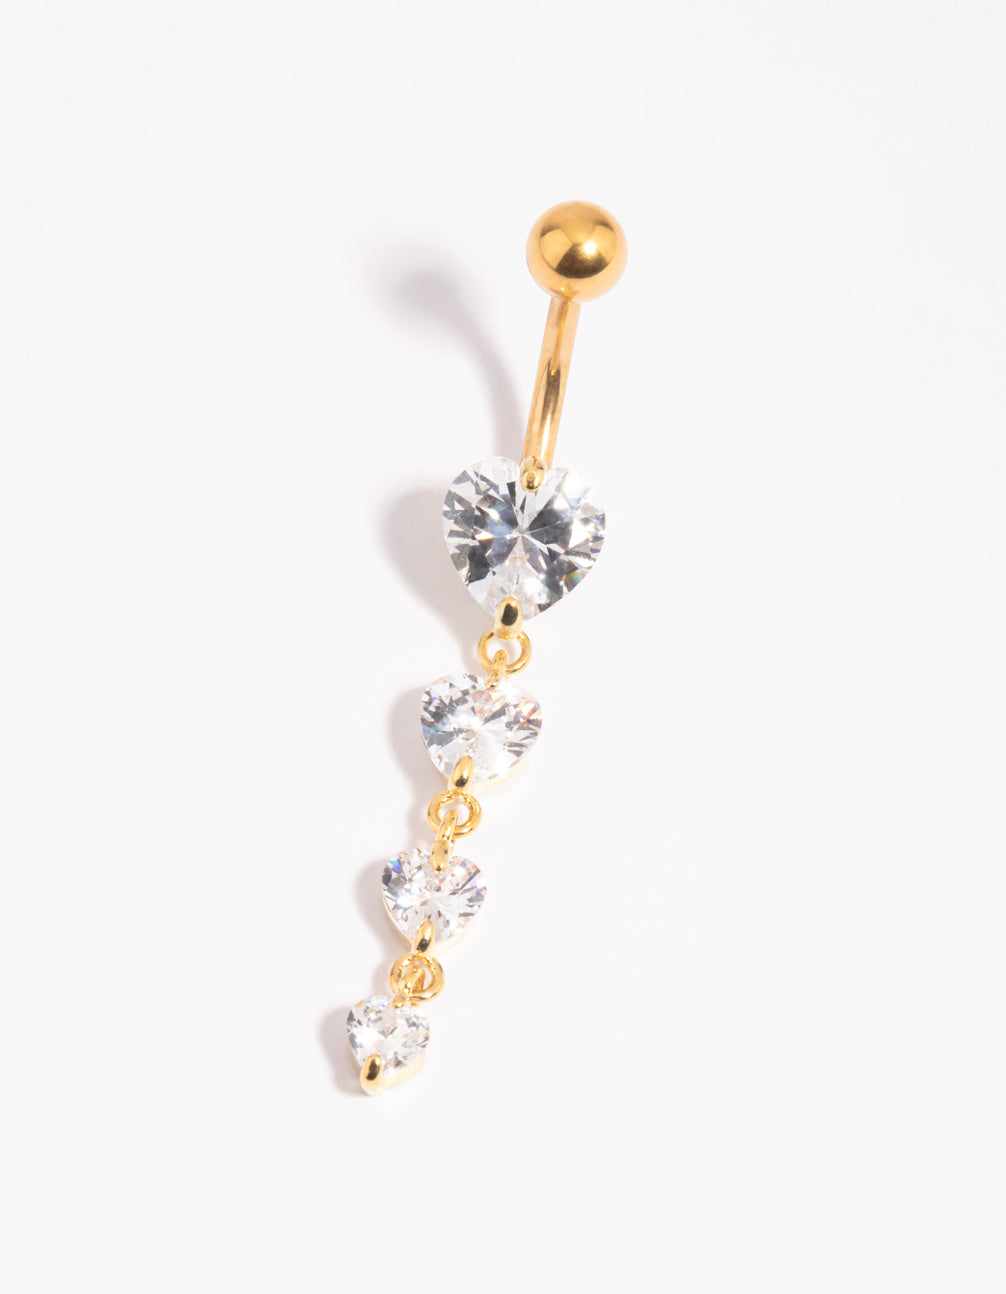 Dangly Belly Rings. Thousands of Belly Dangles for Navel Piercings. – The Belly  Ring Shop